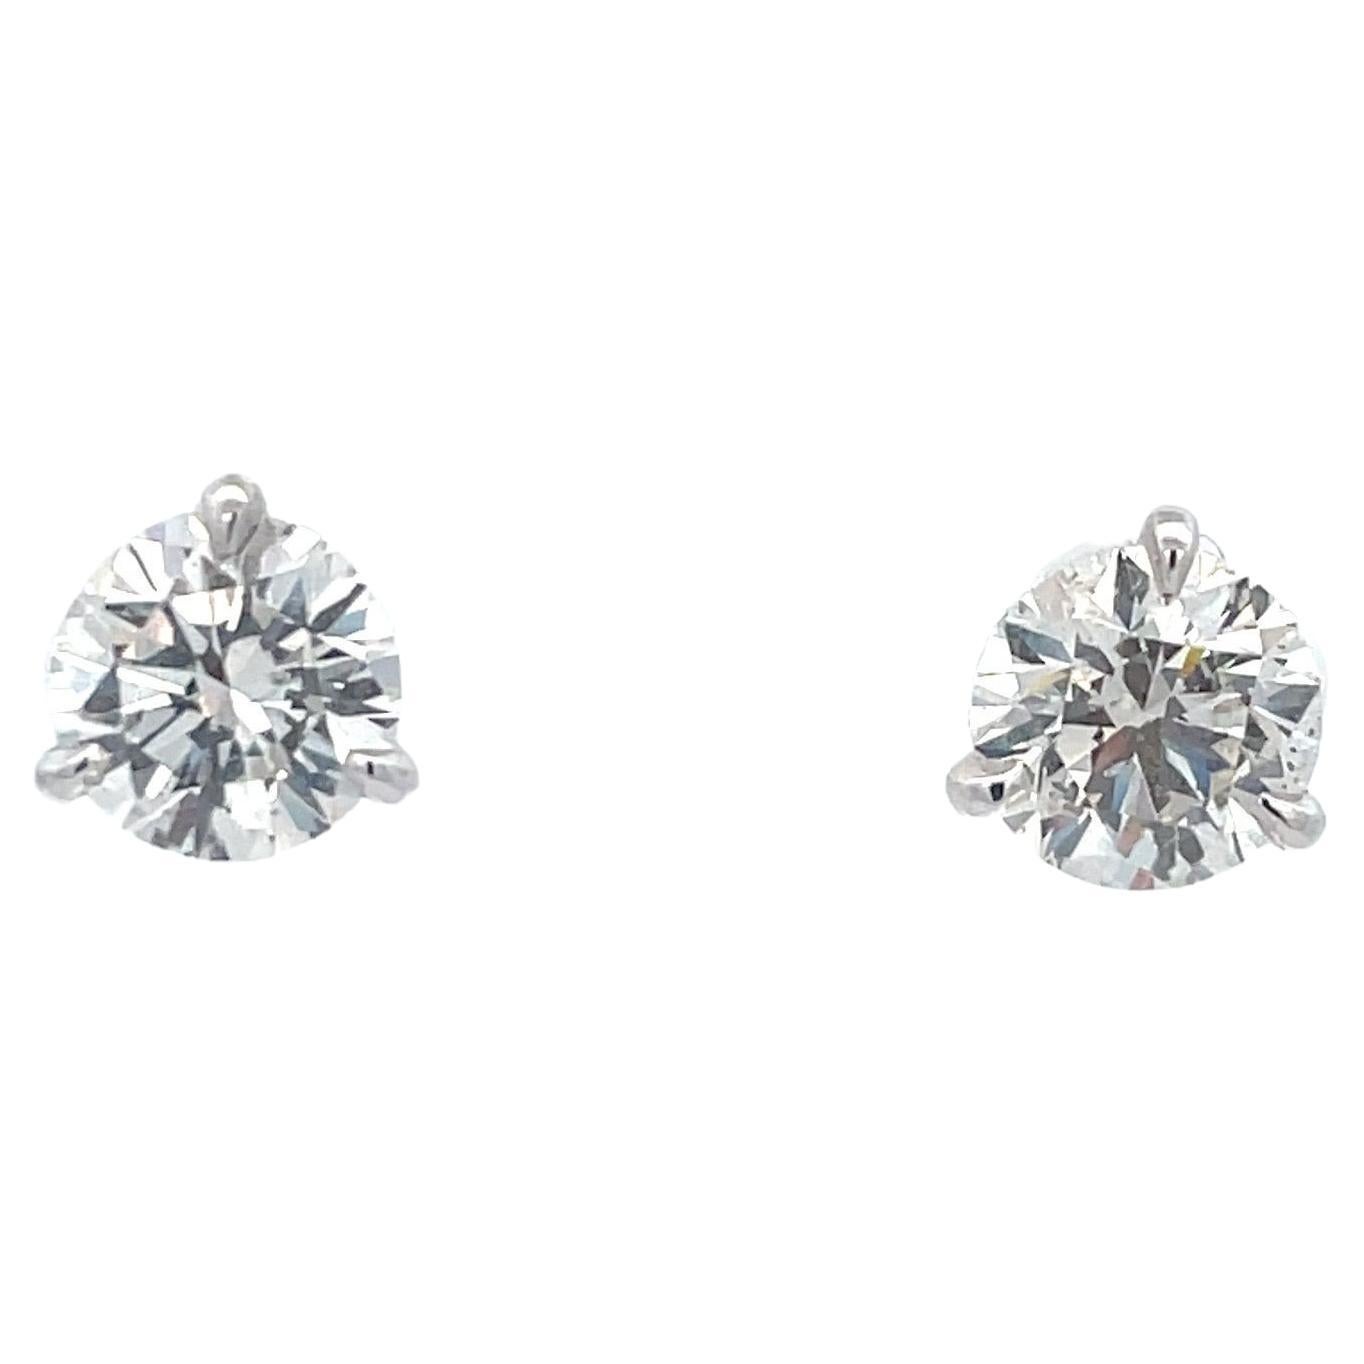 GIA CERTIFIED Diamond Stud Earrings 2.02 Carats G-H SI2 18 Karat White Gold  For Sale